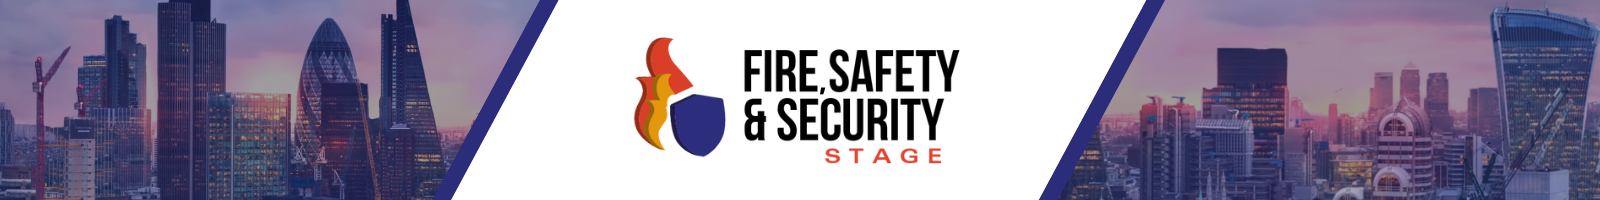 FIRE, SAFETY & SECURITY STAGE